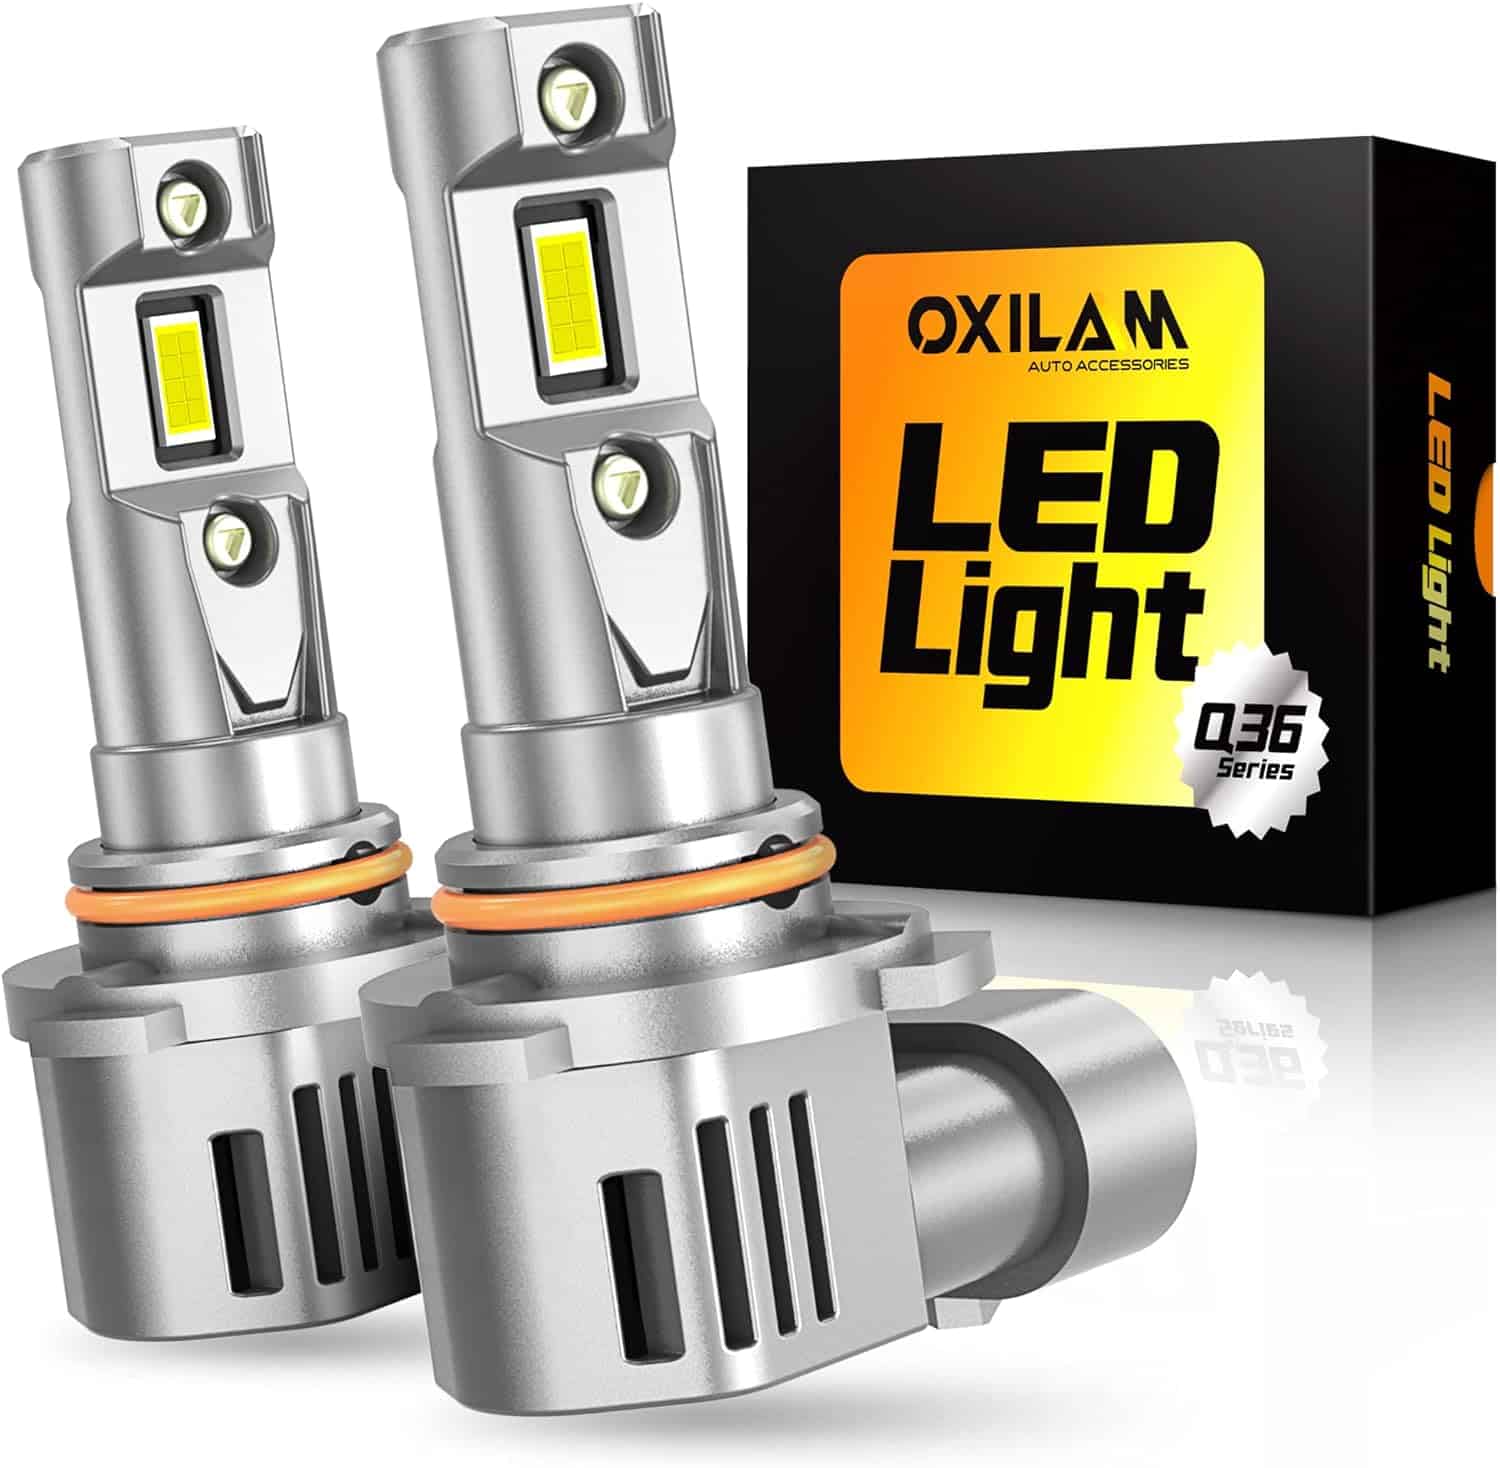 OXILAM Newest 9005 LED Bulbs 20000LM 600% Brighter 9005 Bulb 1:1 Size 6500K White, HB3 LED Light Bulb Wireless Plug and Play for Halogen Replacement, Canbus Ready, 2 Pack